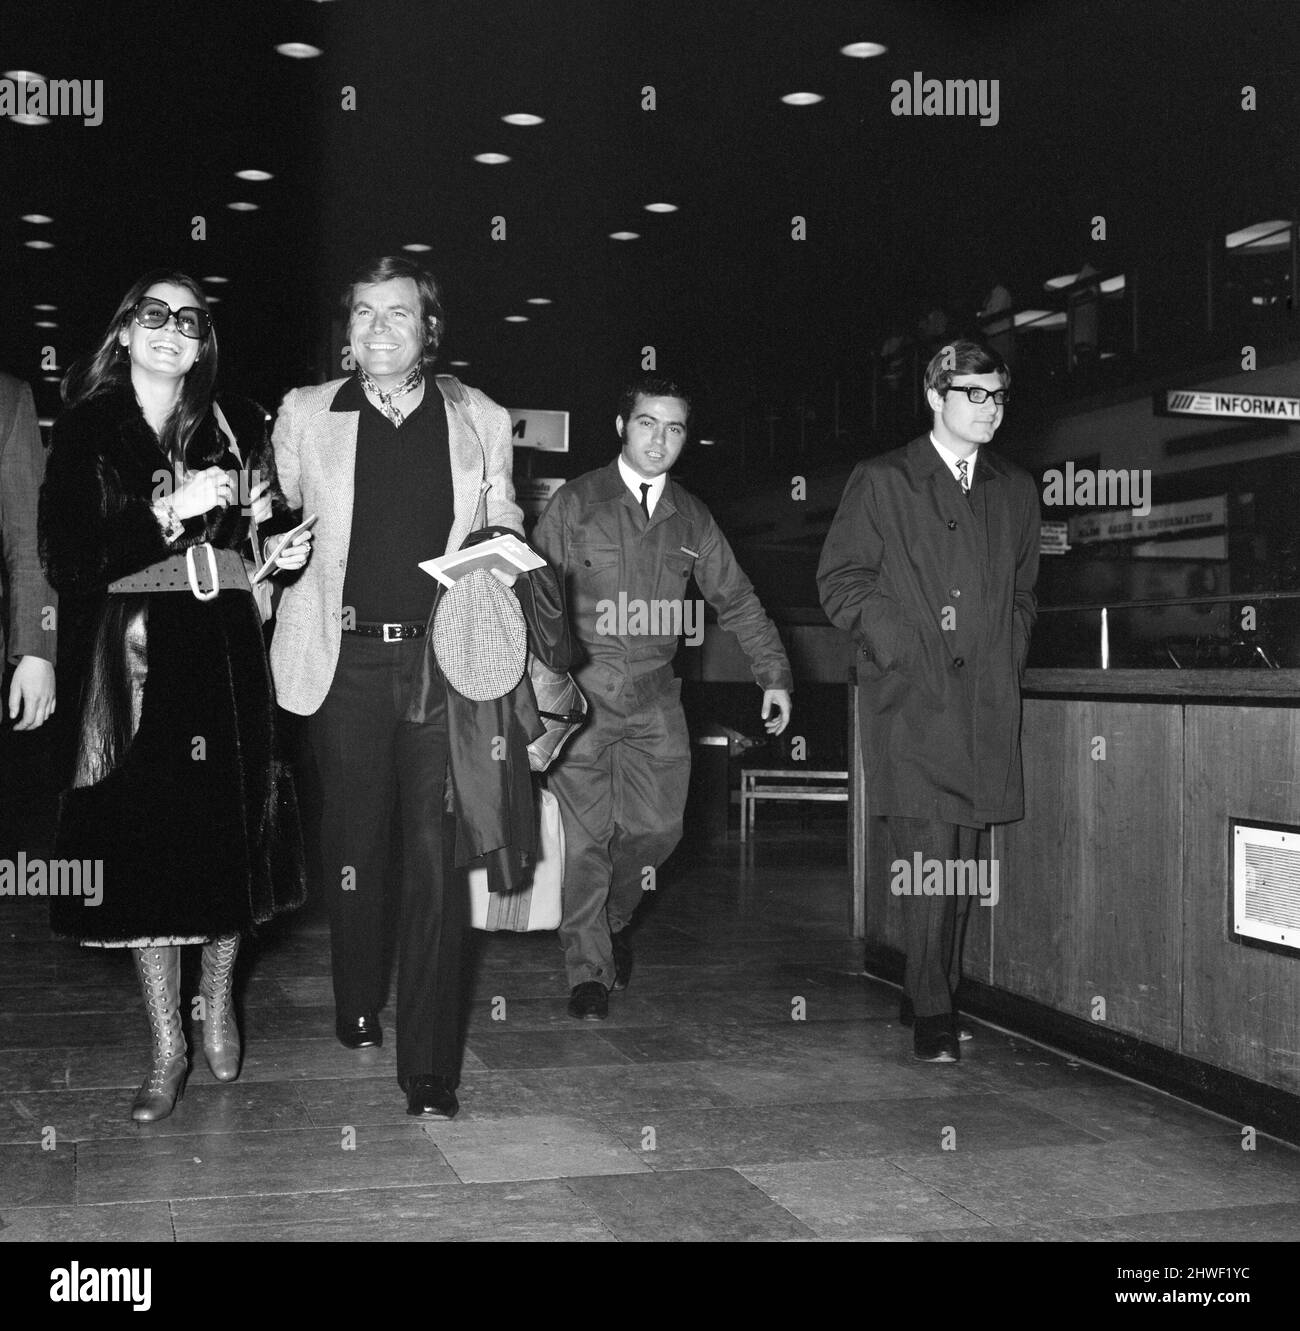 Checking in at London Heathrow Airport, was Tina Sinatra, youngest daughter of singer Frank Sinatra, and her husband-to-be, actor Robert Wagner, who will be returning on sunday to start a new film. 21st November 1970. Stock Photo